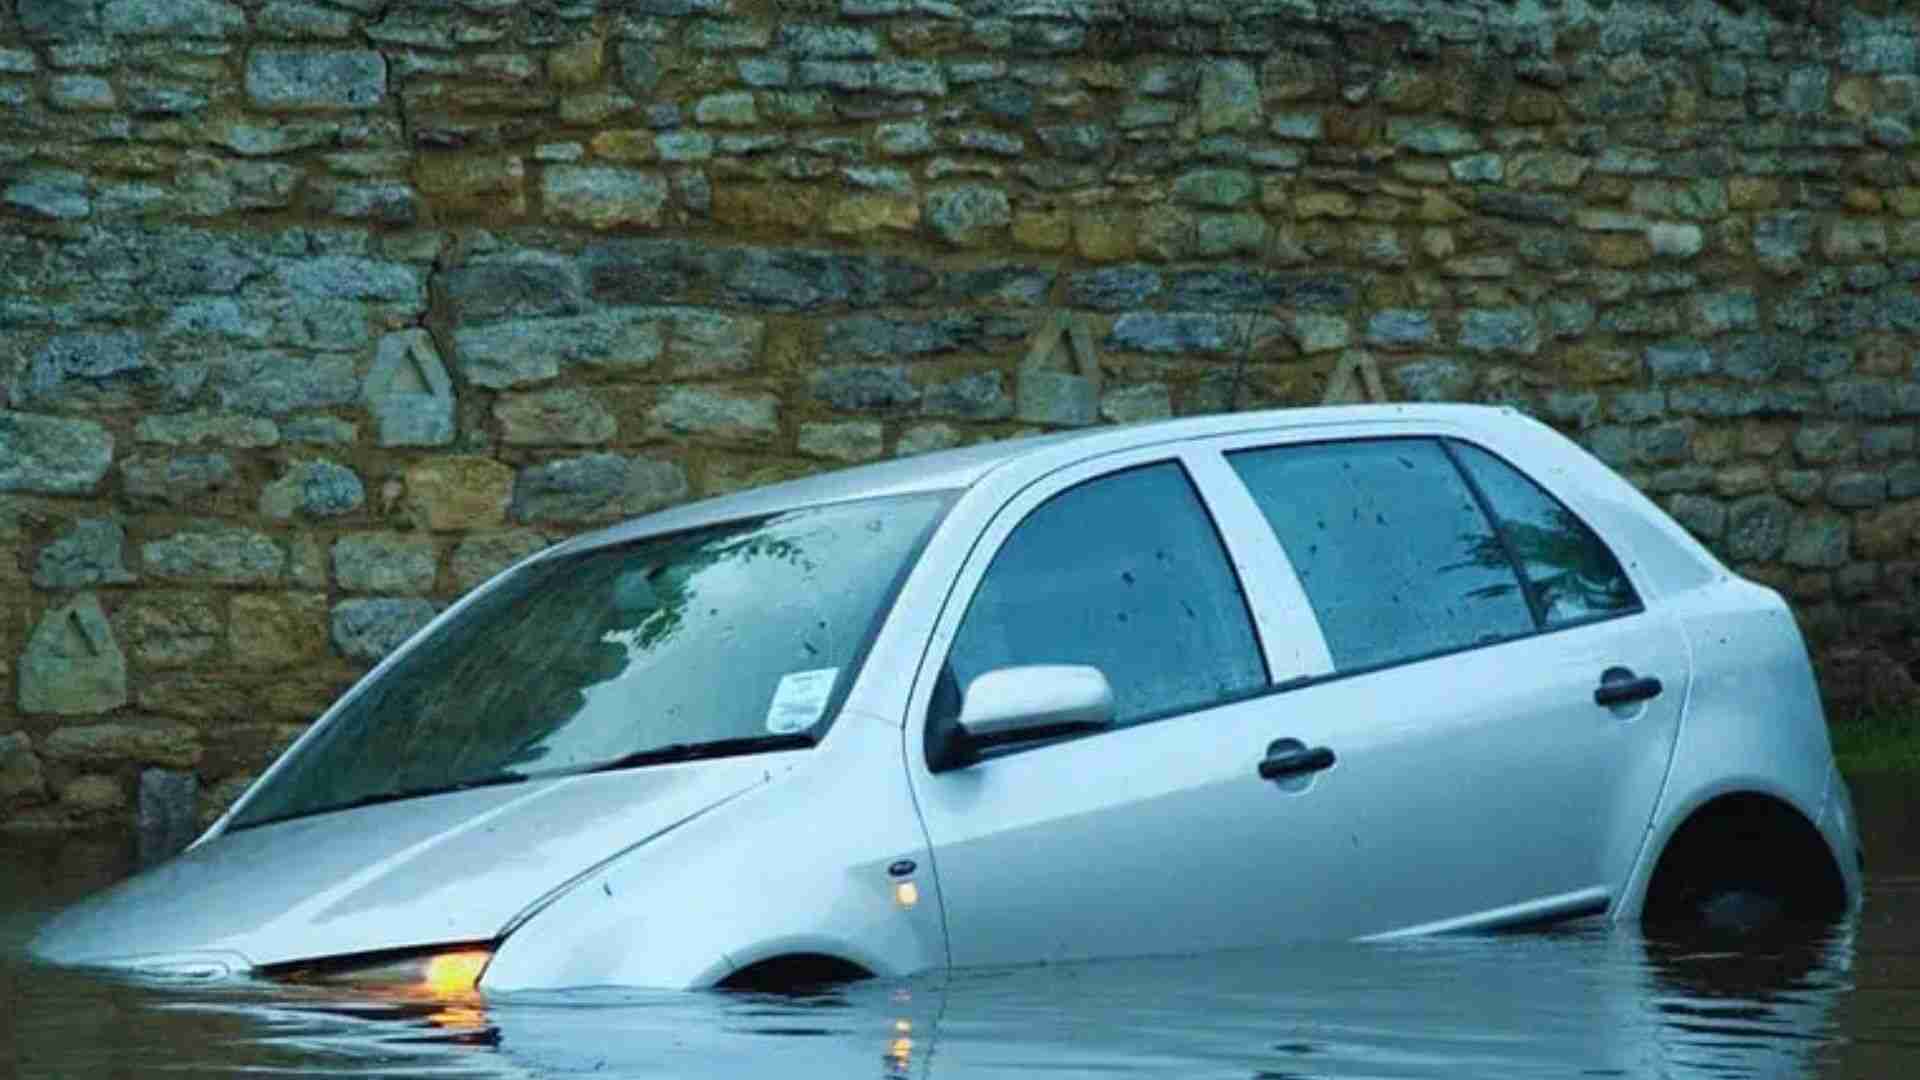 Car diving into water